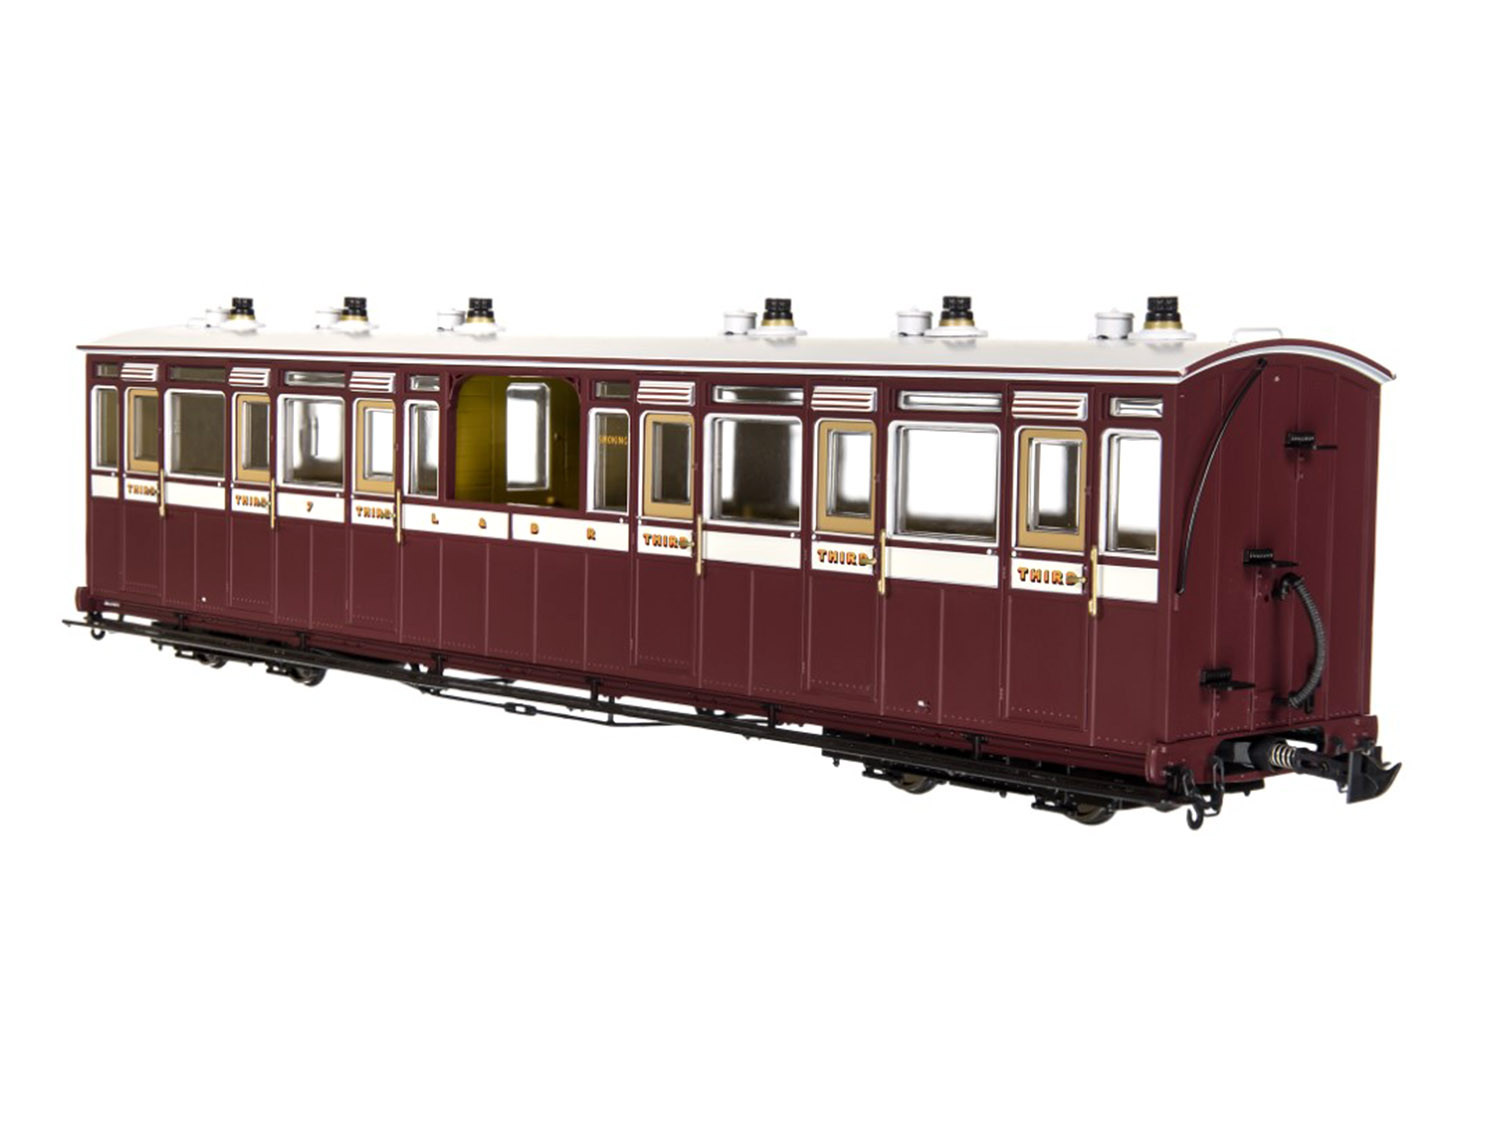 L&B All 3rd Coach No.11 1901-1922 (DCC-Fitted)